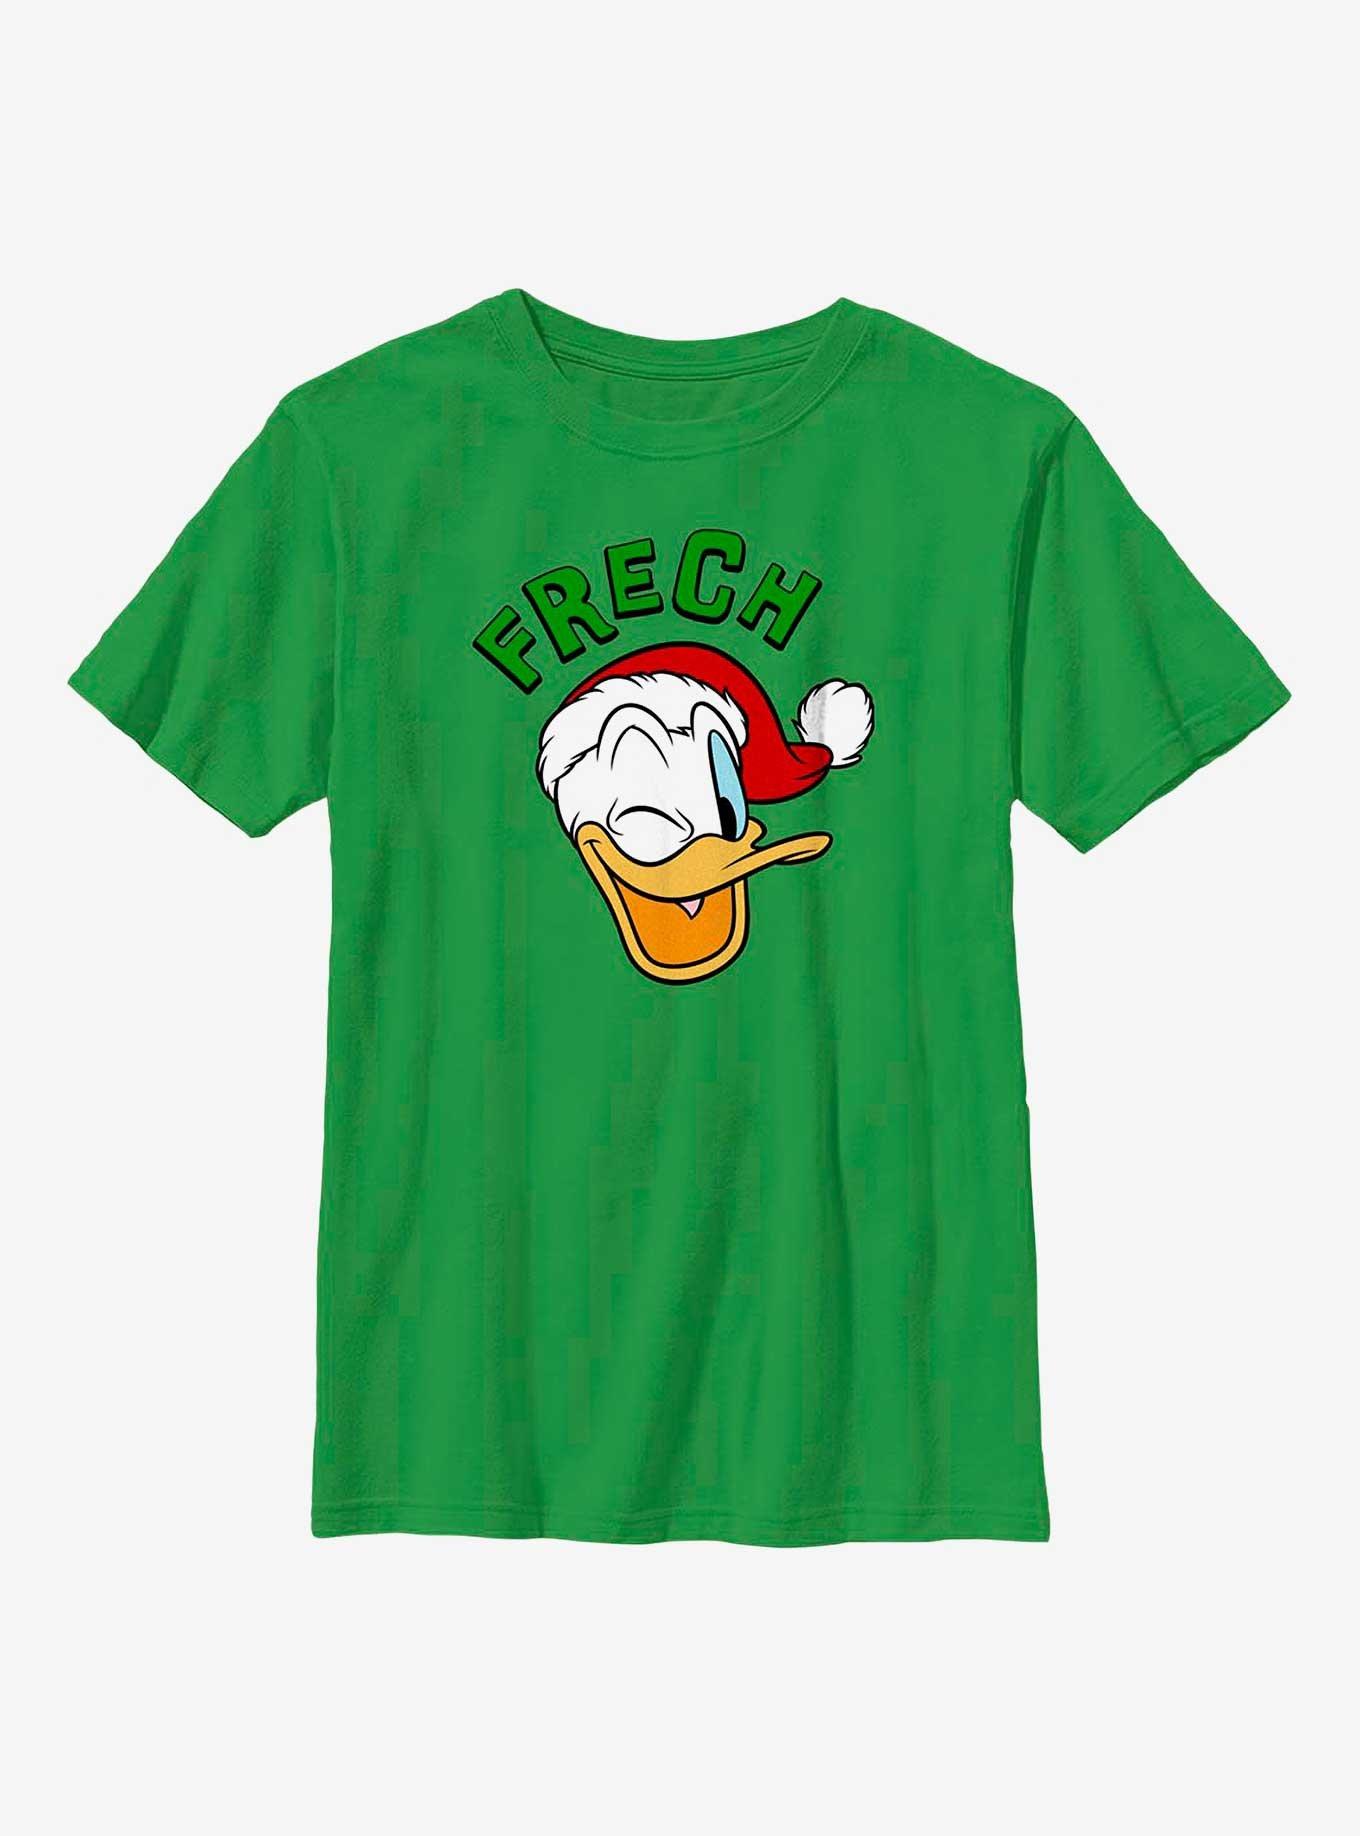 Disney Donald Duck Frech Naughty in German Youth T-Shirt, KELLY, hi-res